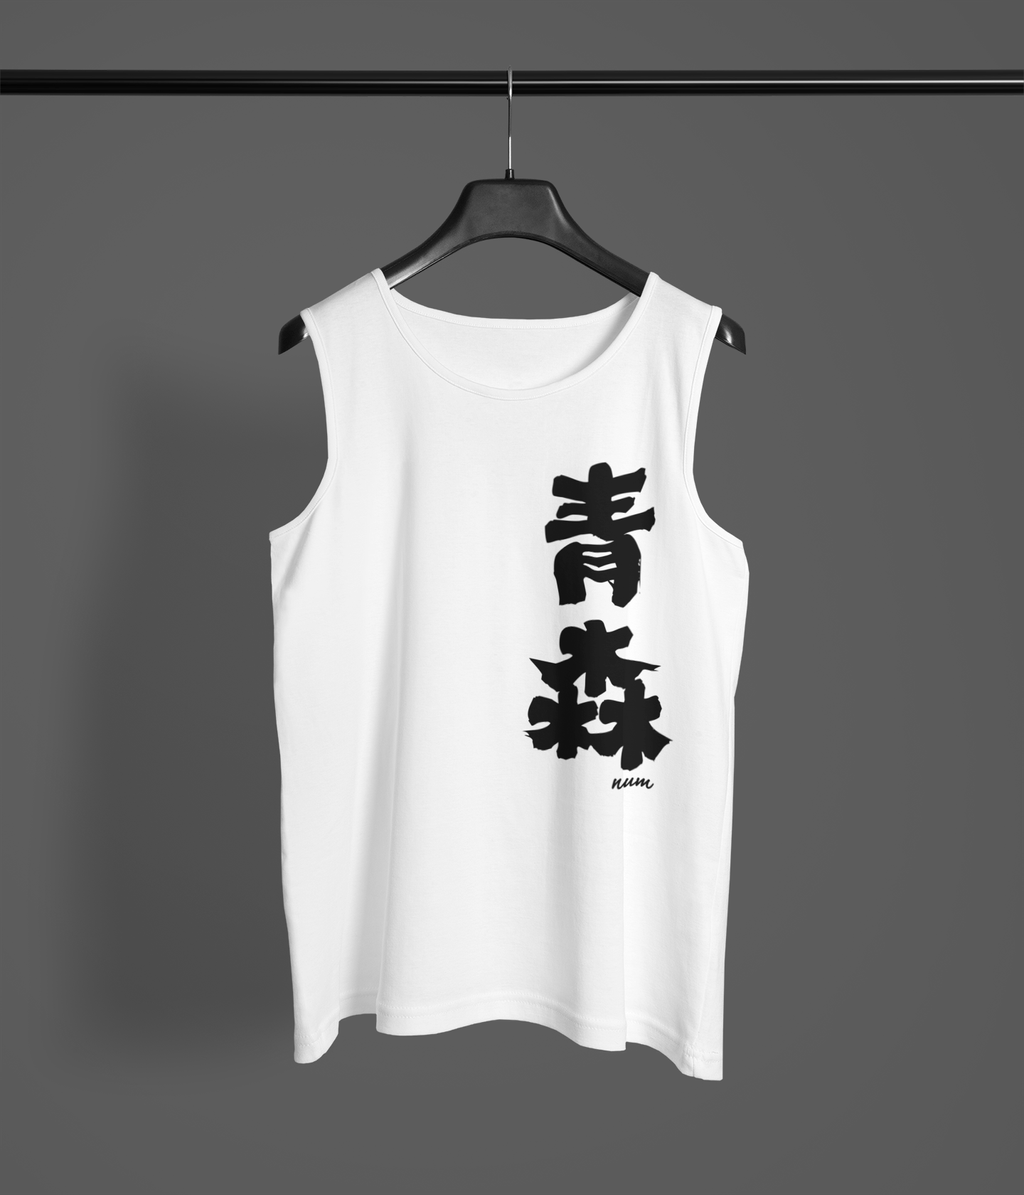 mockup-featuring-a-men-s-tank-top-hanging-from-a-dark-metal-pipe-1986-el1 (4).png